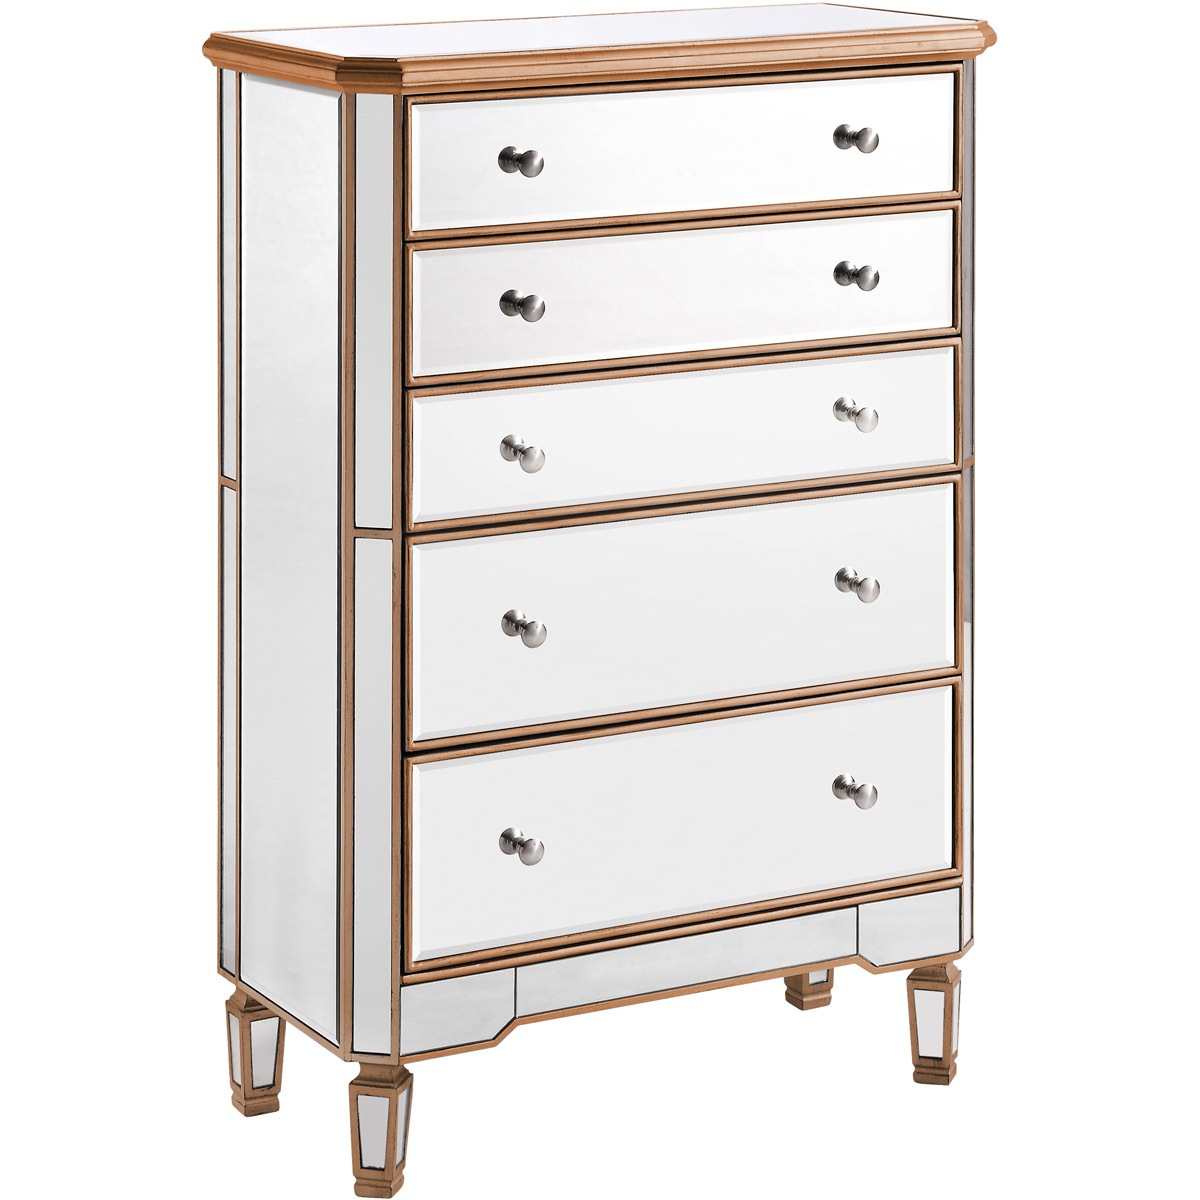 Mf6-1126g 5 Drawer Cabinet Gold Paint - Hand Rubbed, Antique Gold - 33 X 16 X 49 In.